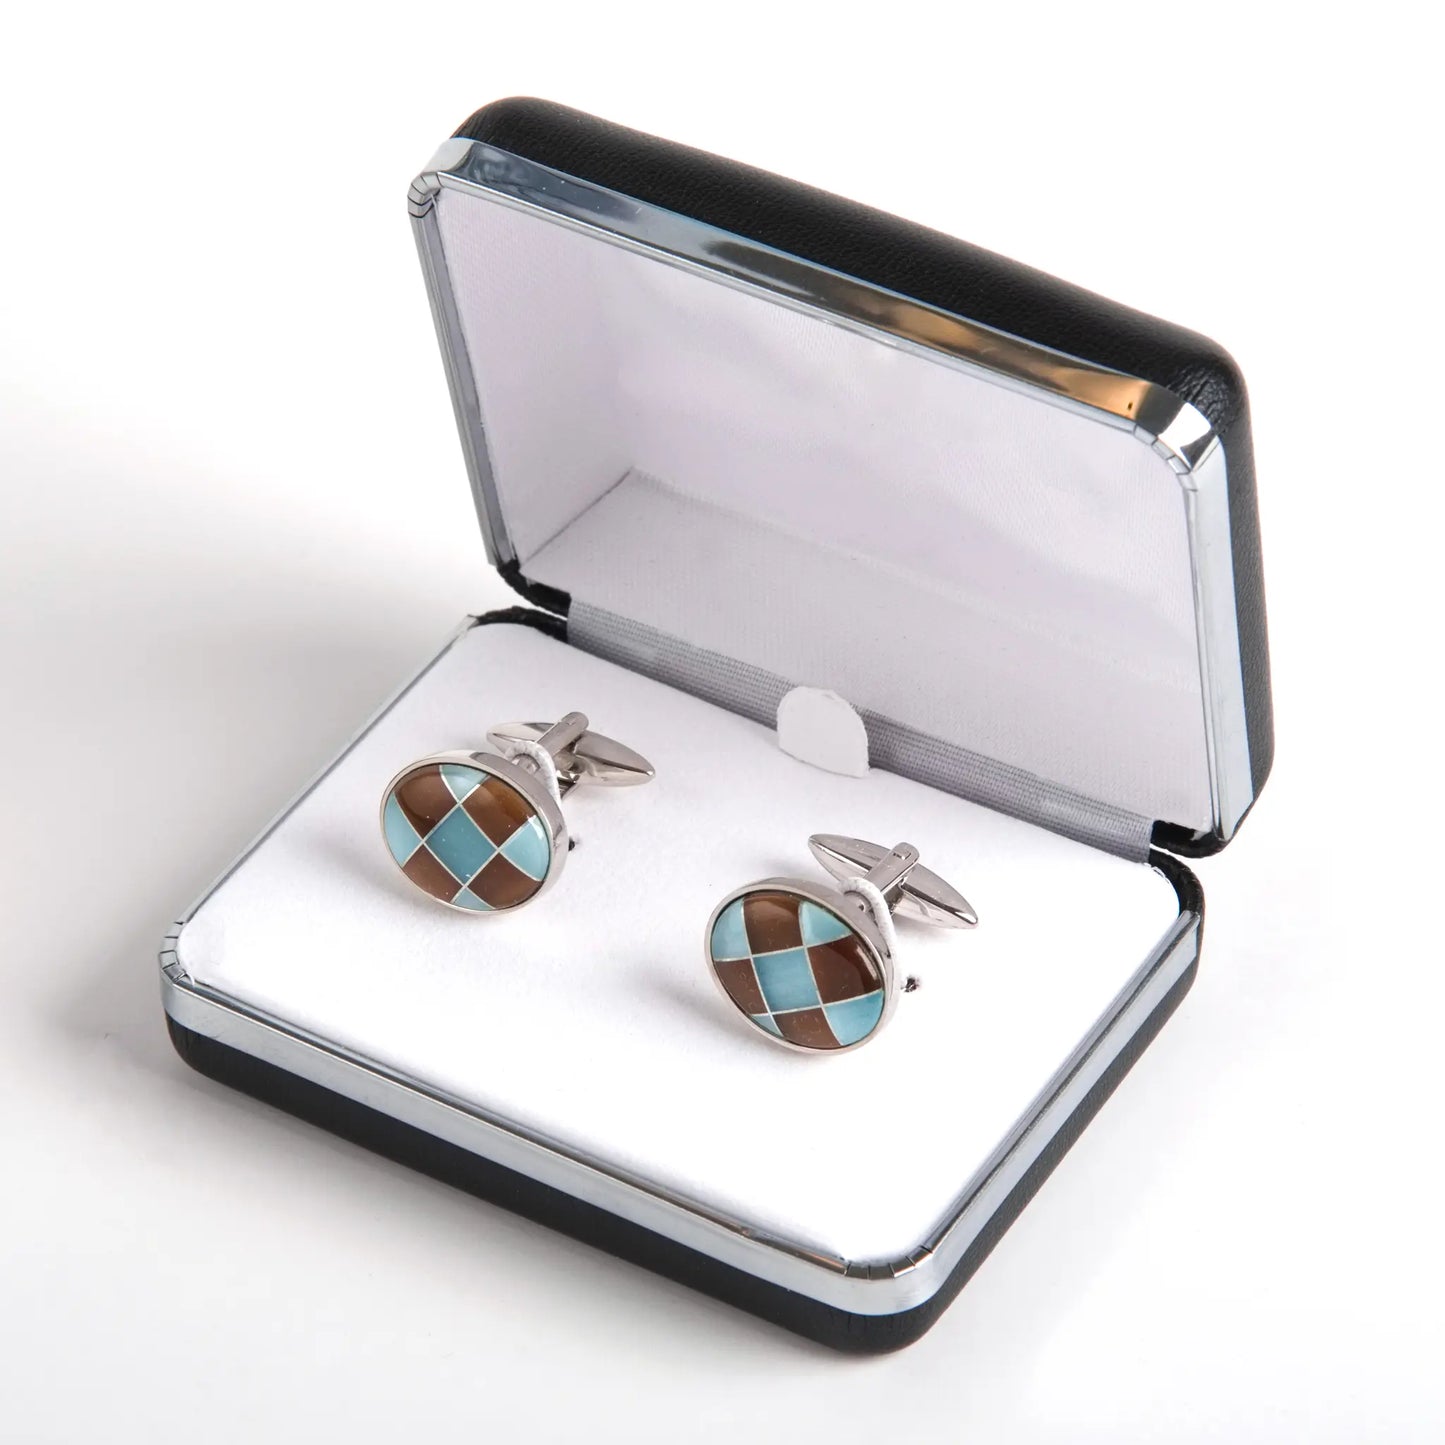 Turquoise & Brown Checkered Onyx Cuff Link - Larimars Clothing Men's Formal and casual wear shirts